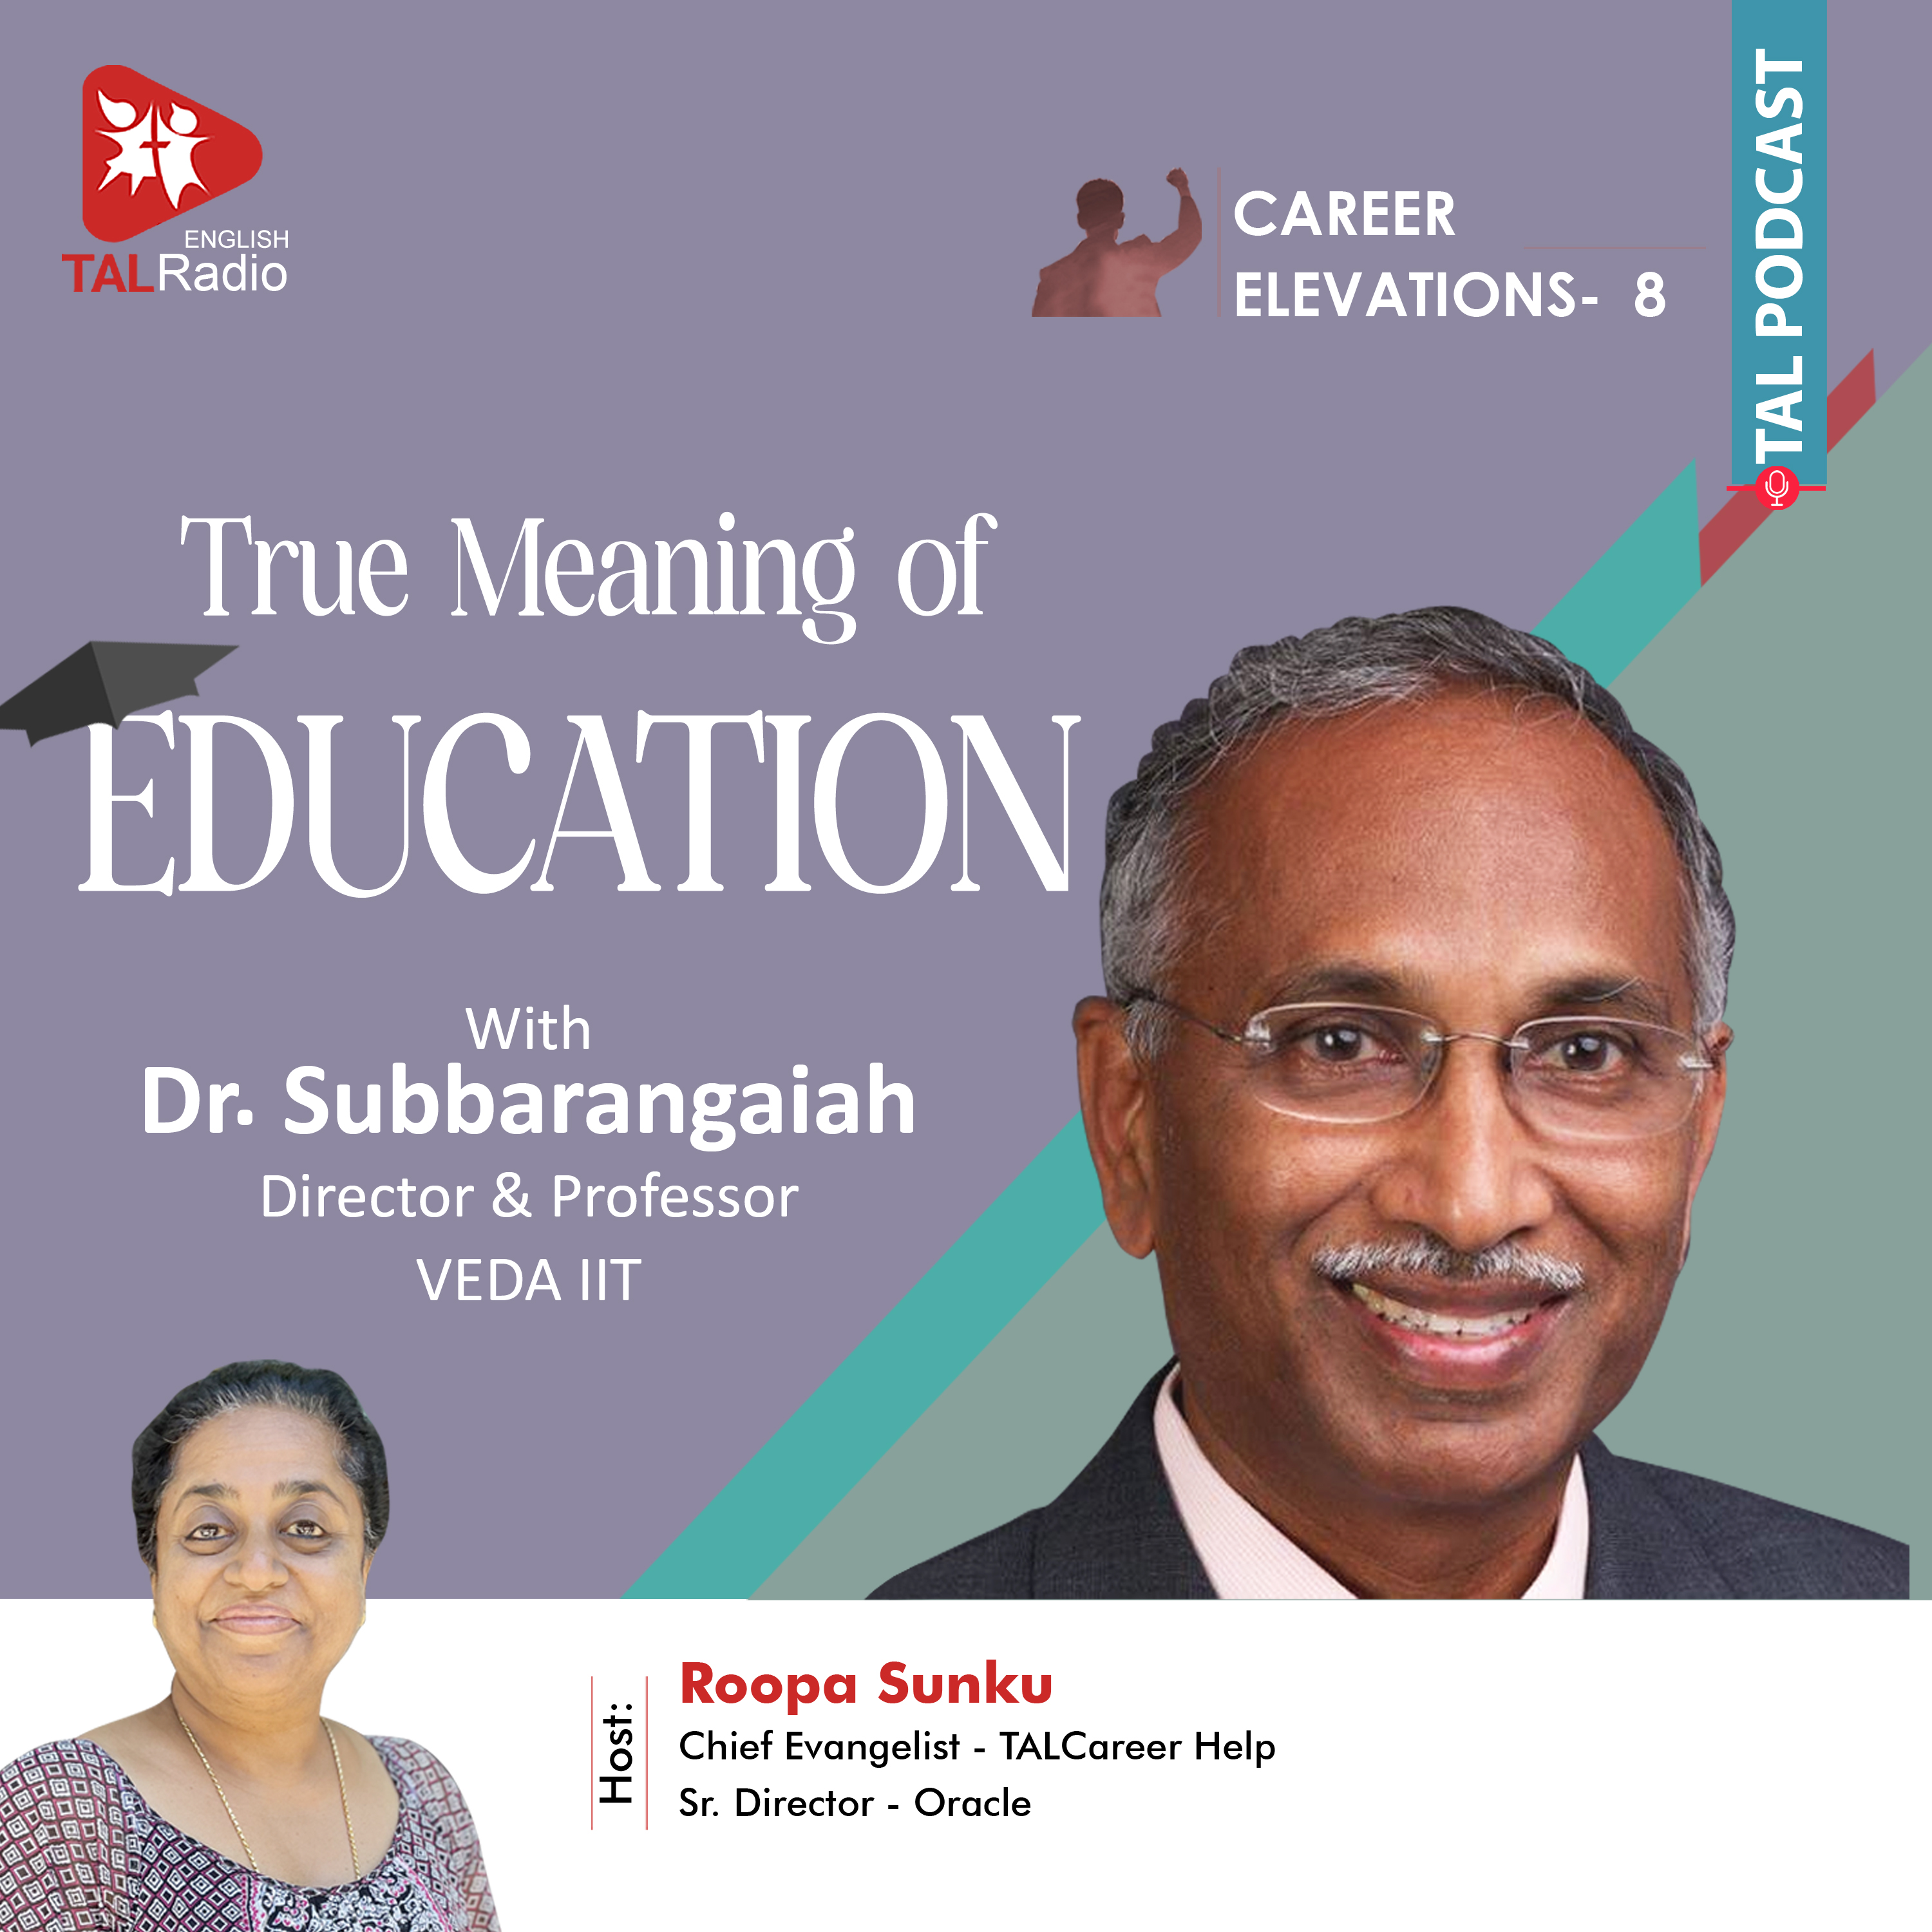 True Meaning of EDUCATION | Career Elevations 8